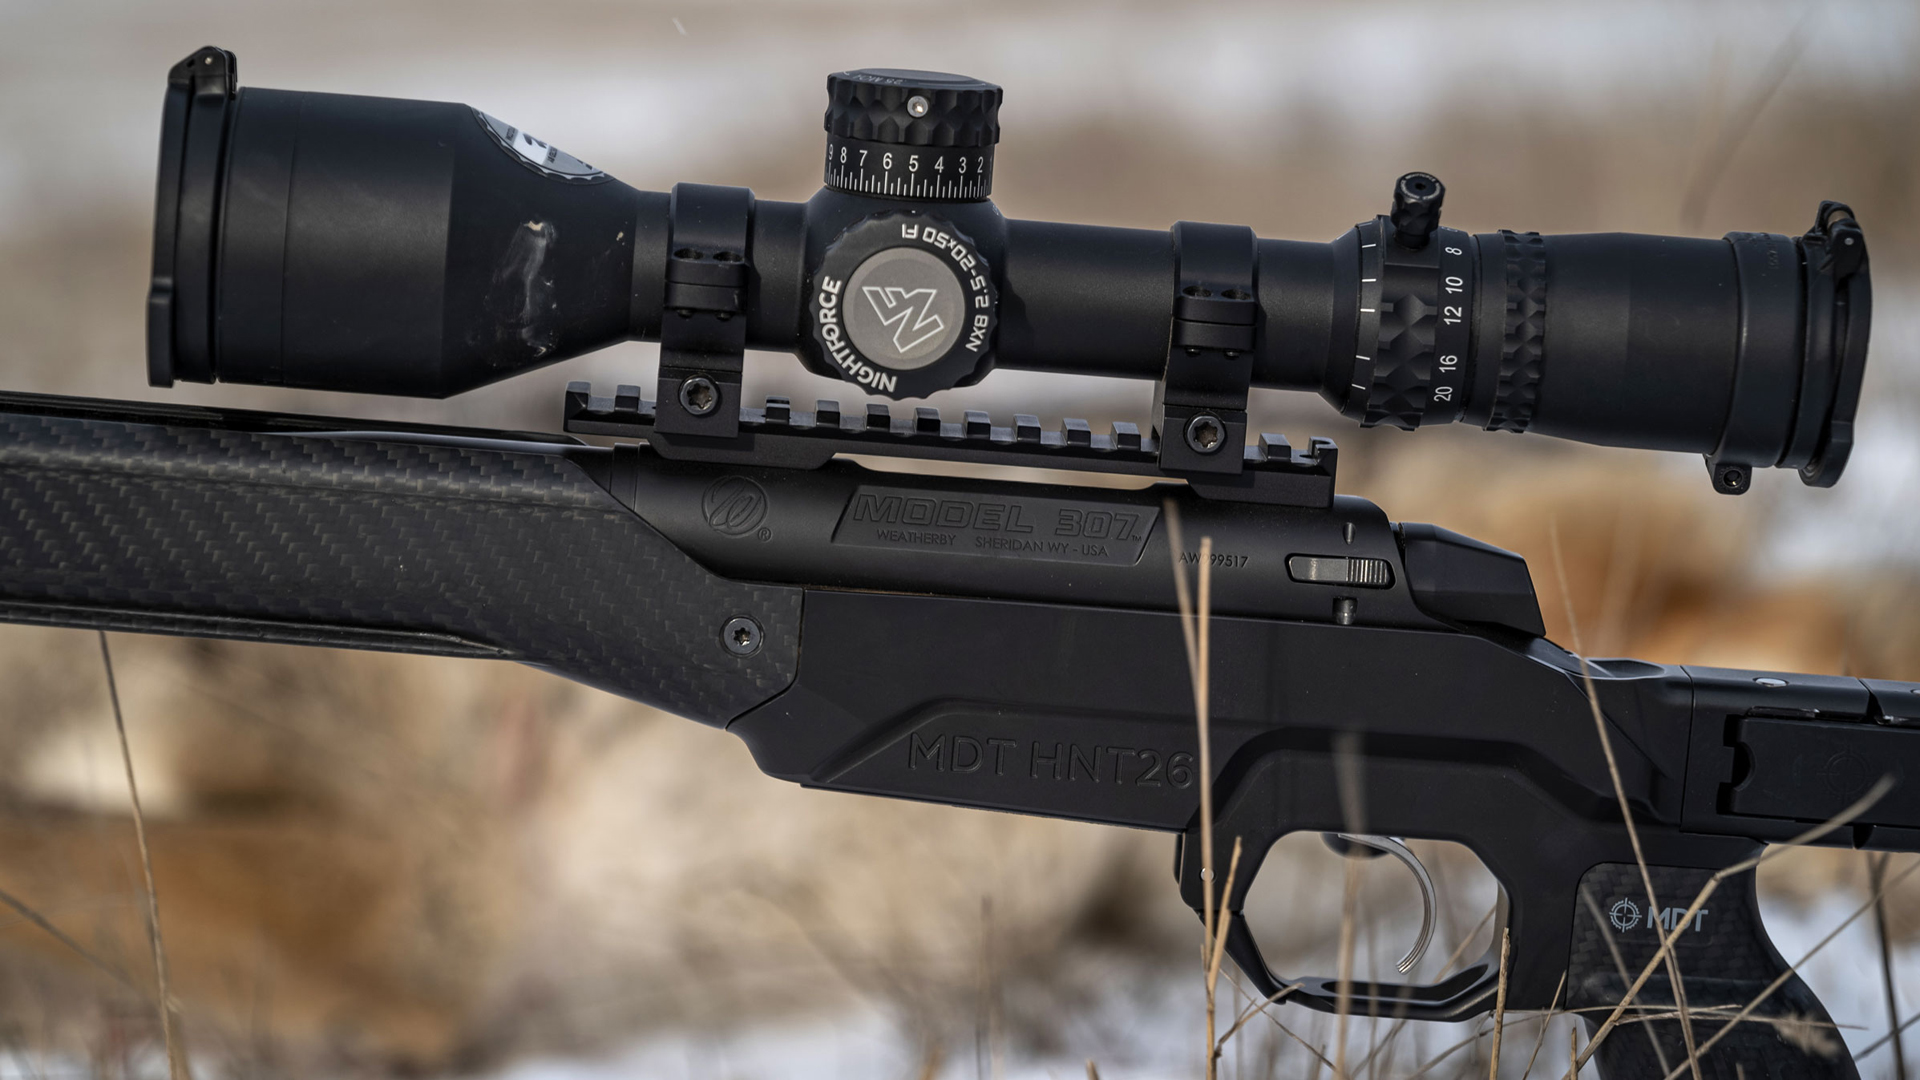 Left side of a Weatherby 307 series rifle with a Nightforce scope mounted.